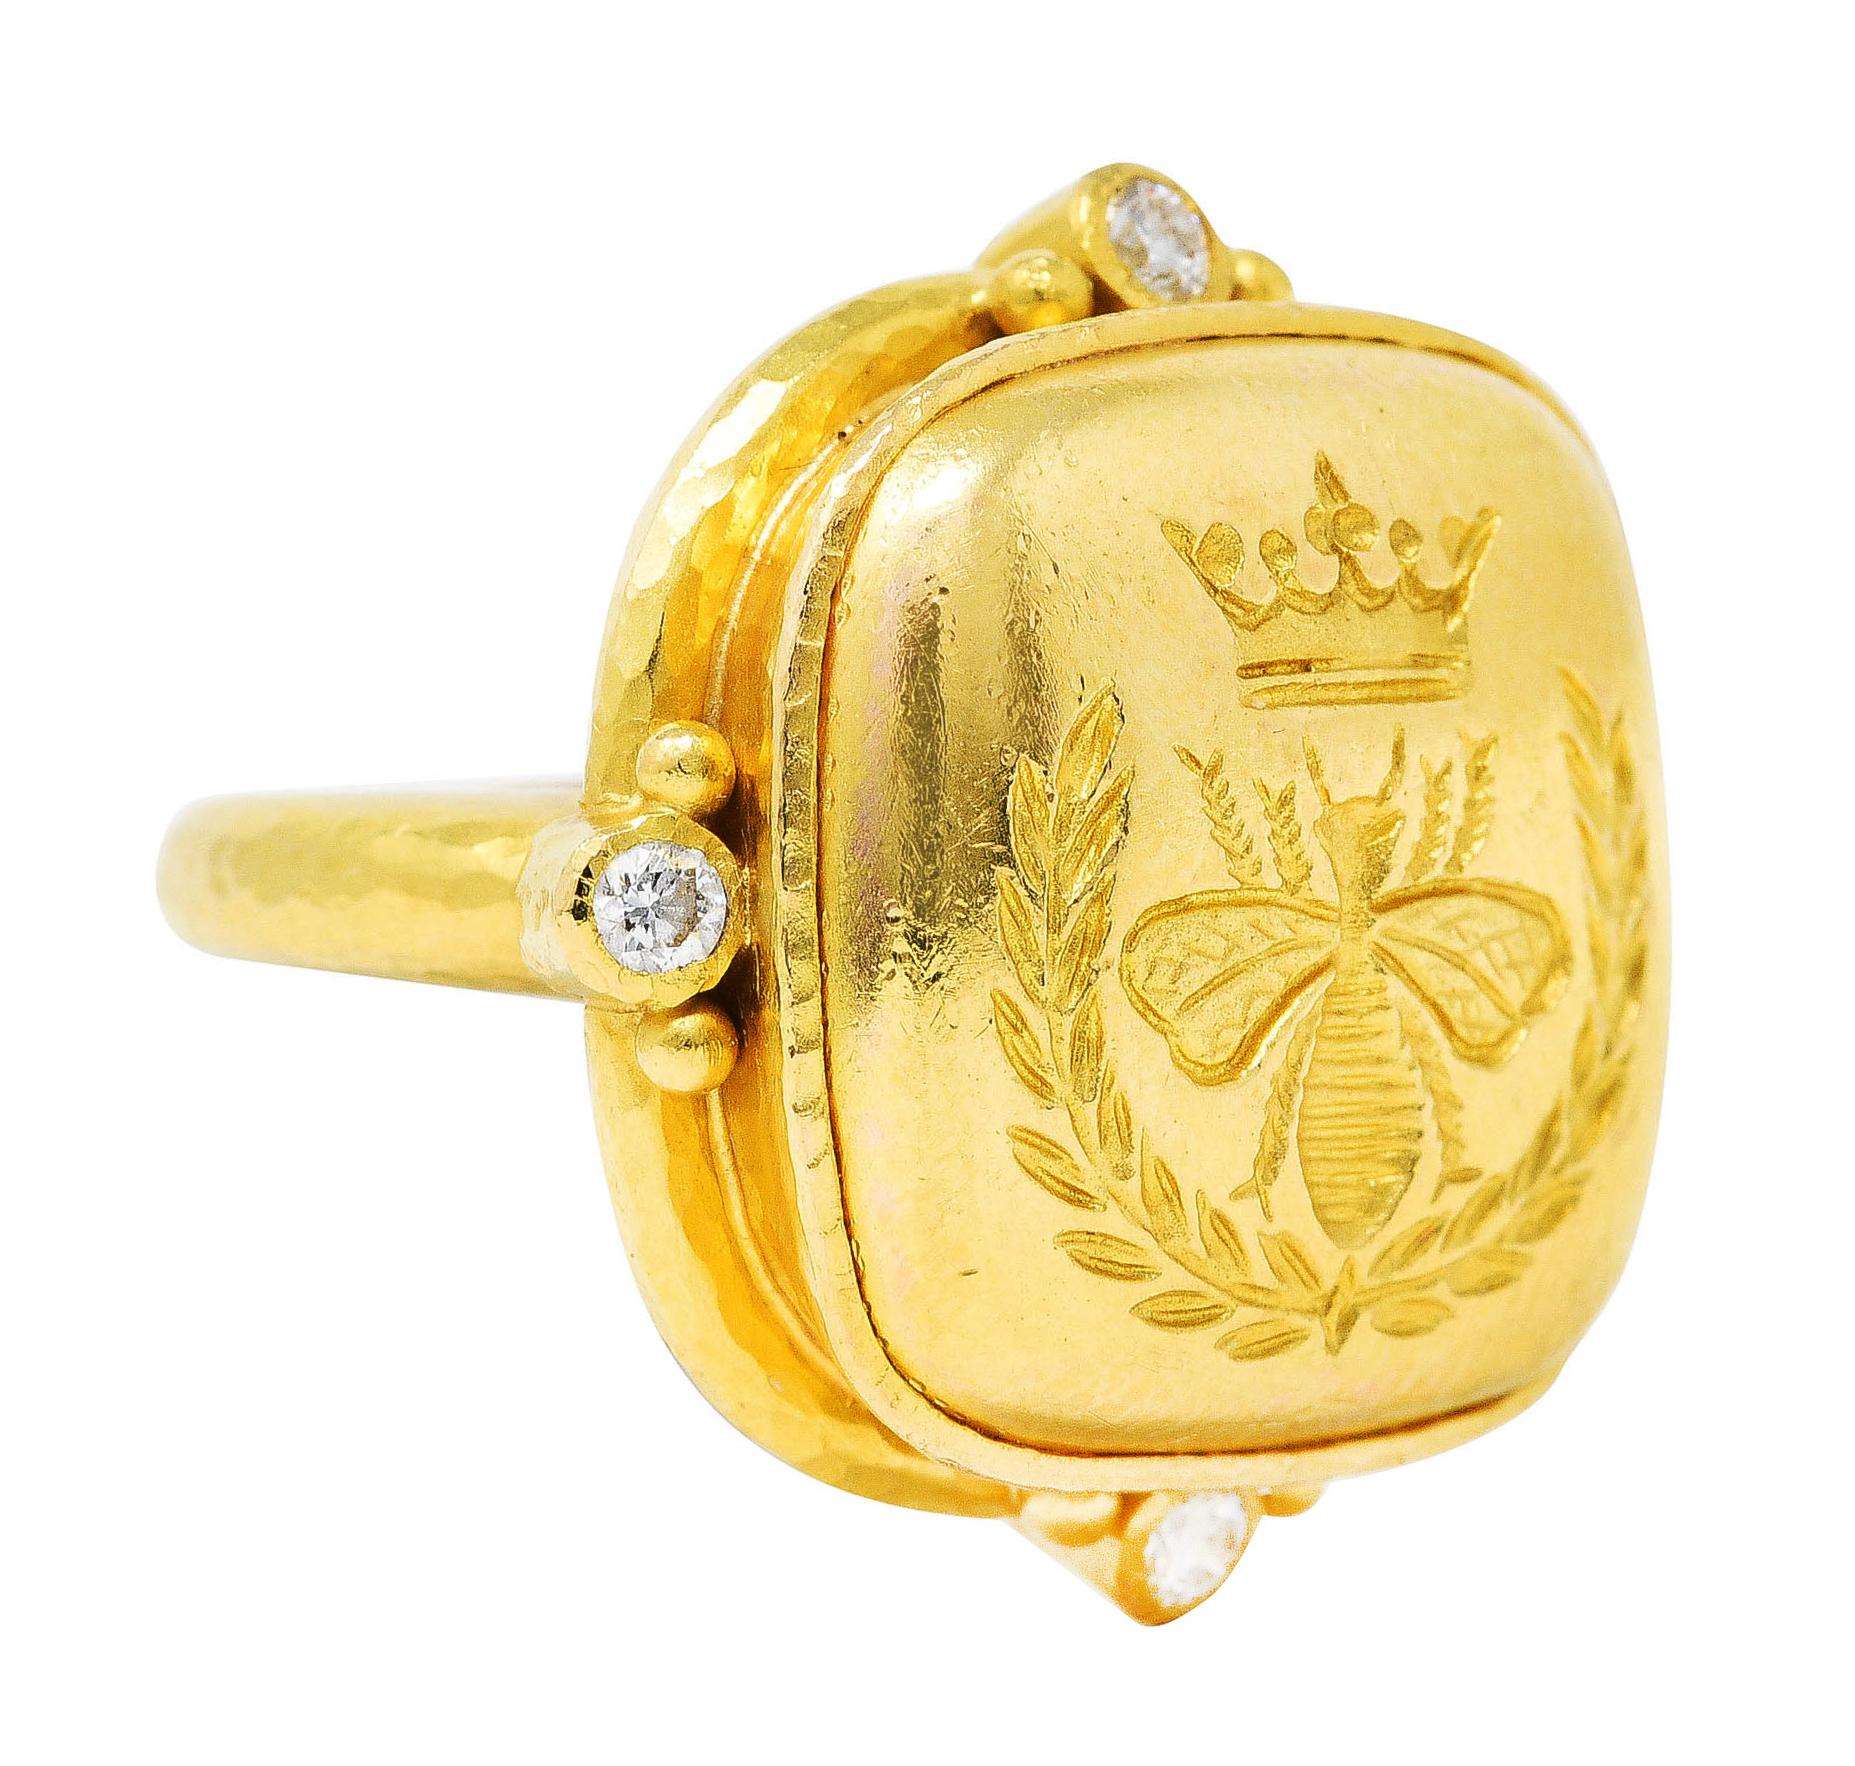 Ring designed with square cushion shaped head with hammered gold texture throughout

Centering a gold cushion cabochon engraved with bee crown and laurel

Featuring gold beading and bezel set diamonds at cardinal points

Diamonds are eye clean and